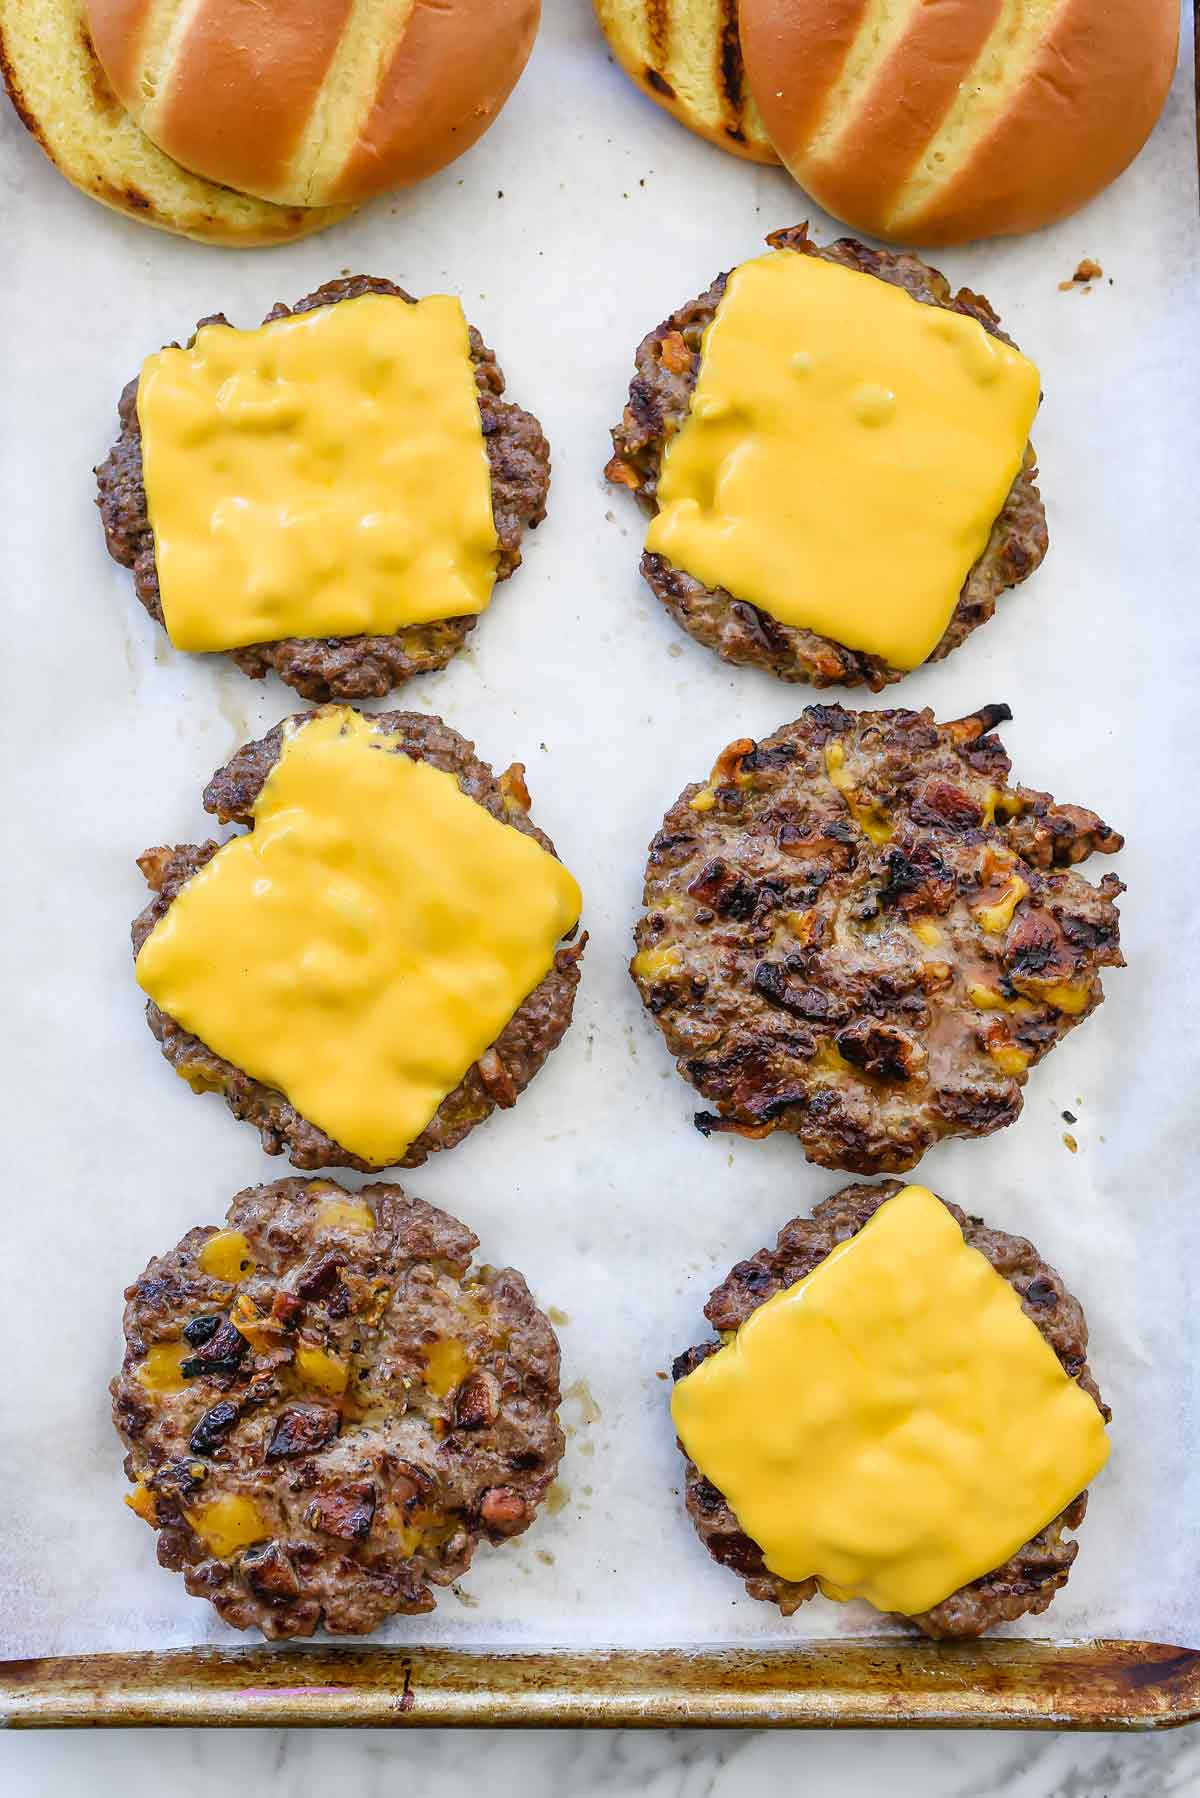 Bacon Cheddar Cheeseburger and Caramelized Onions